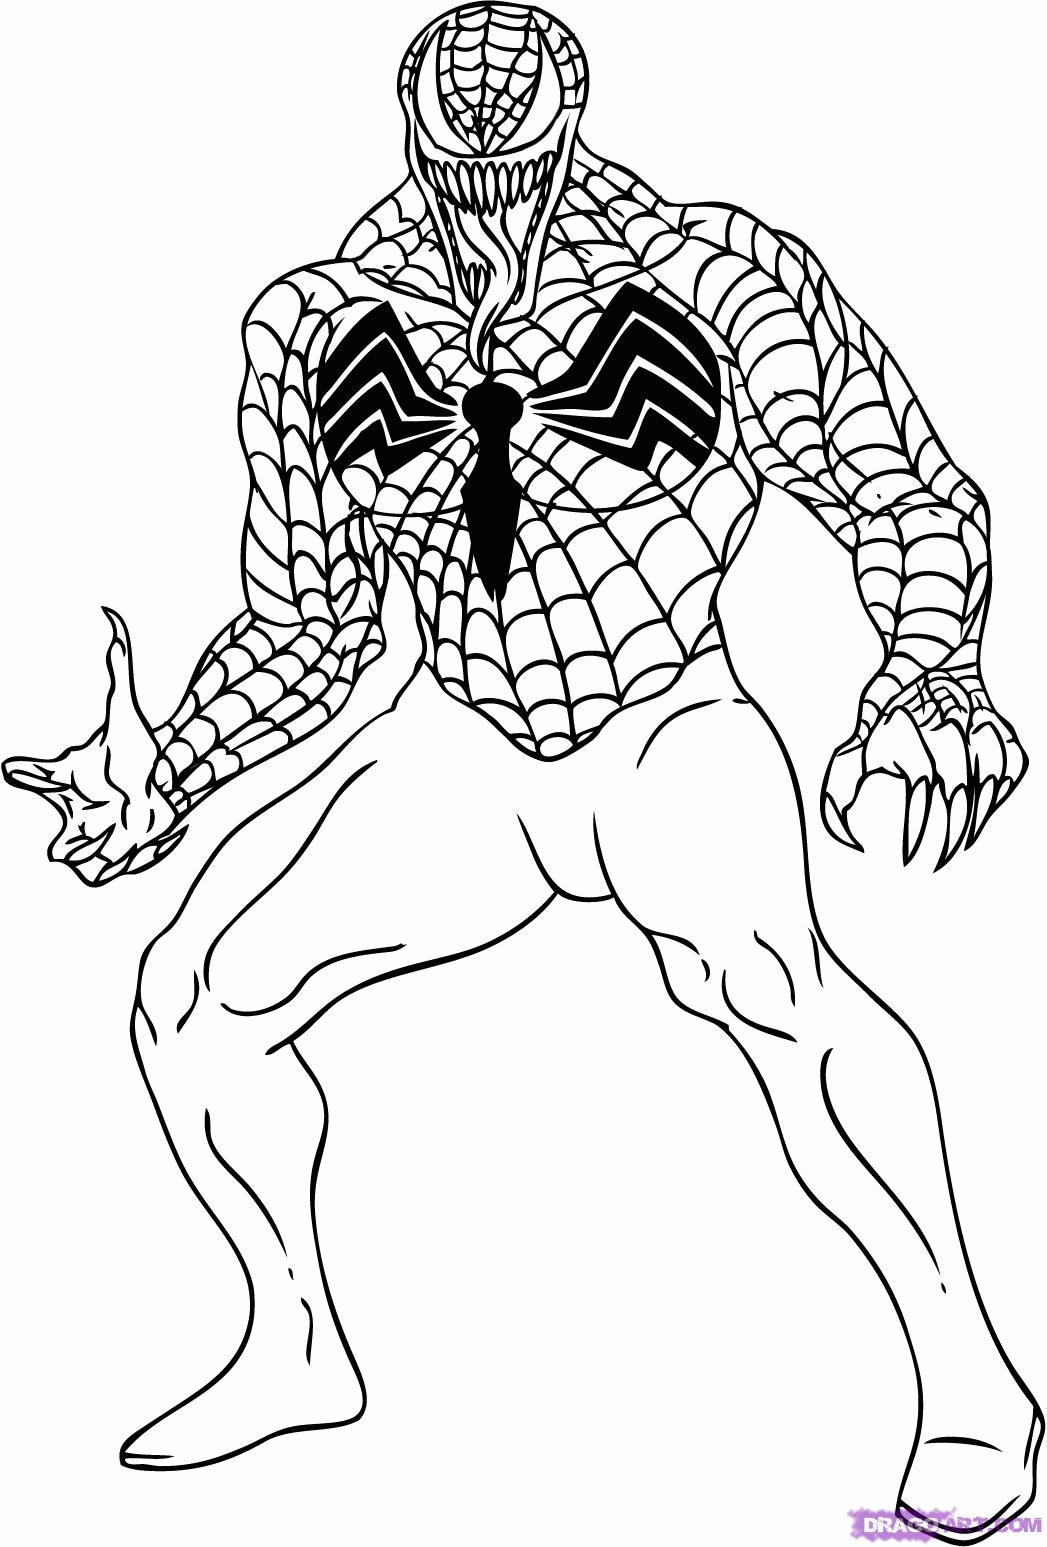 Printable venom coloring pages coloring me